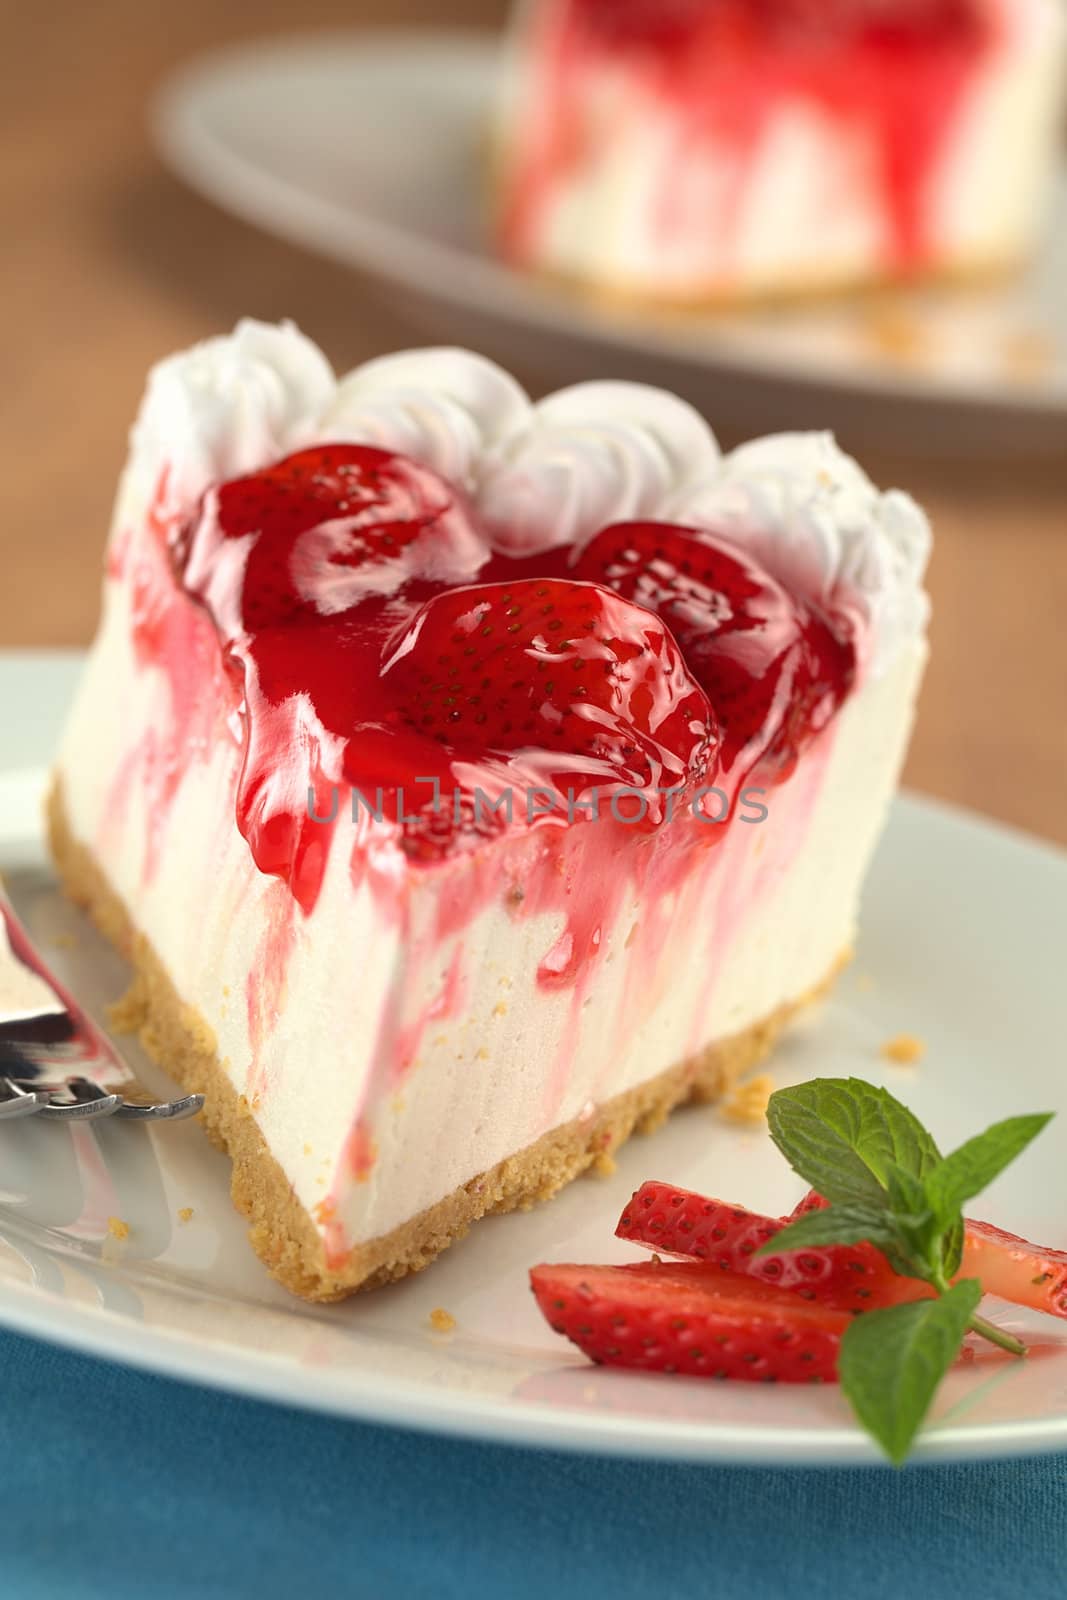 Fresh strawberry cheesecake with strawberry slices and mint on the side (Selective Focus, Focus on the first strawberry on the cake)